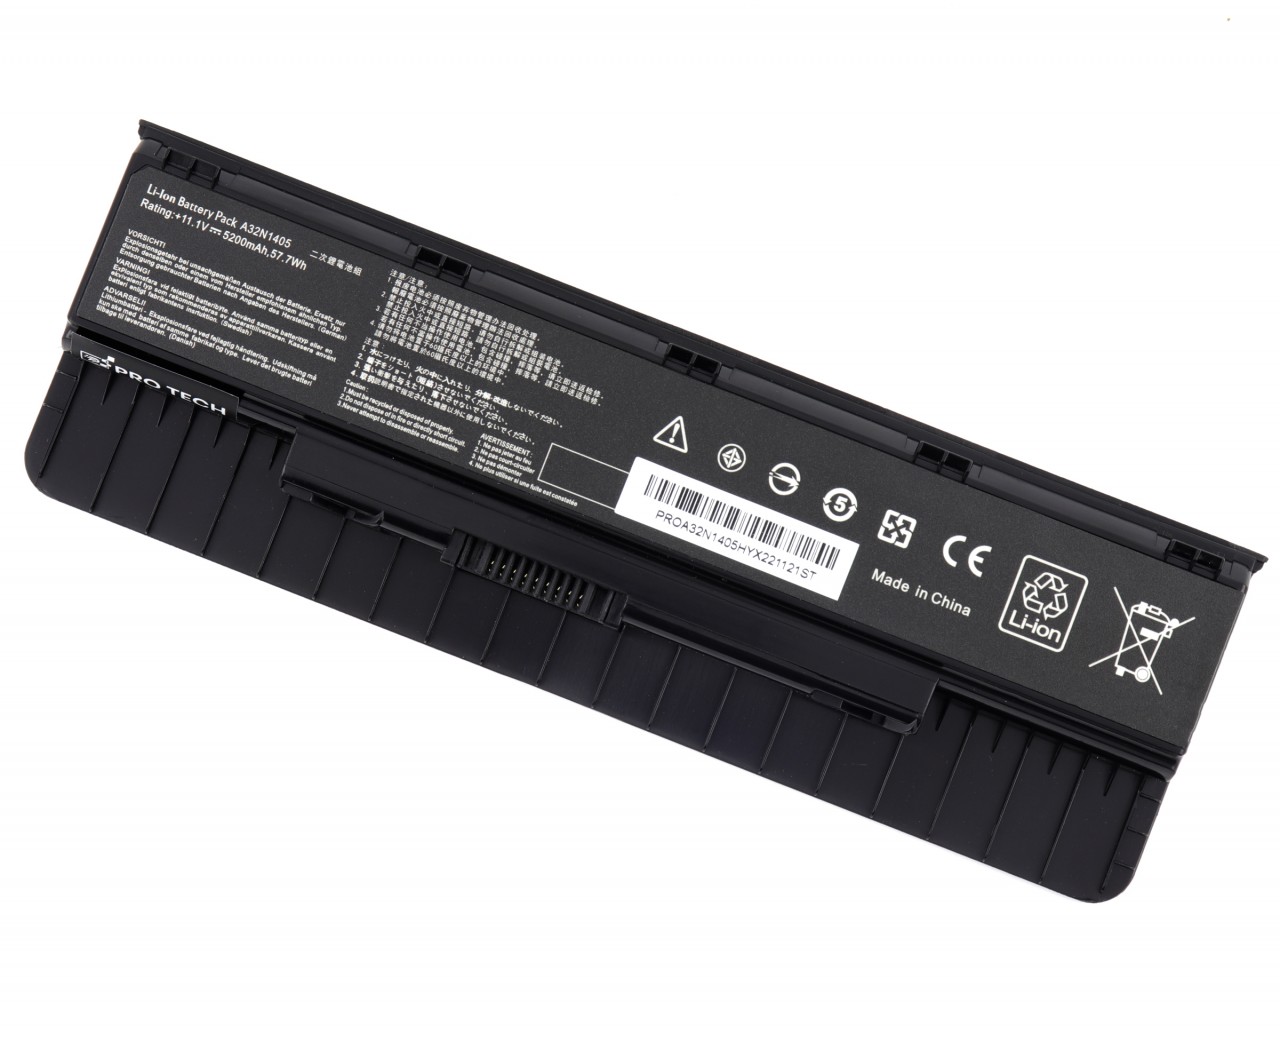 Baterie Asus N551JX 57.7Wh / 5200mAh Protech High Quality Replacement